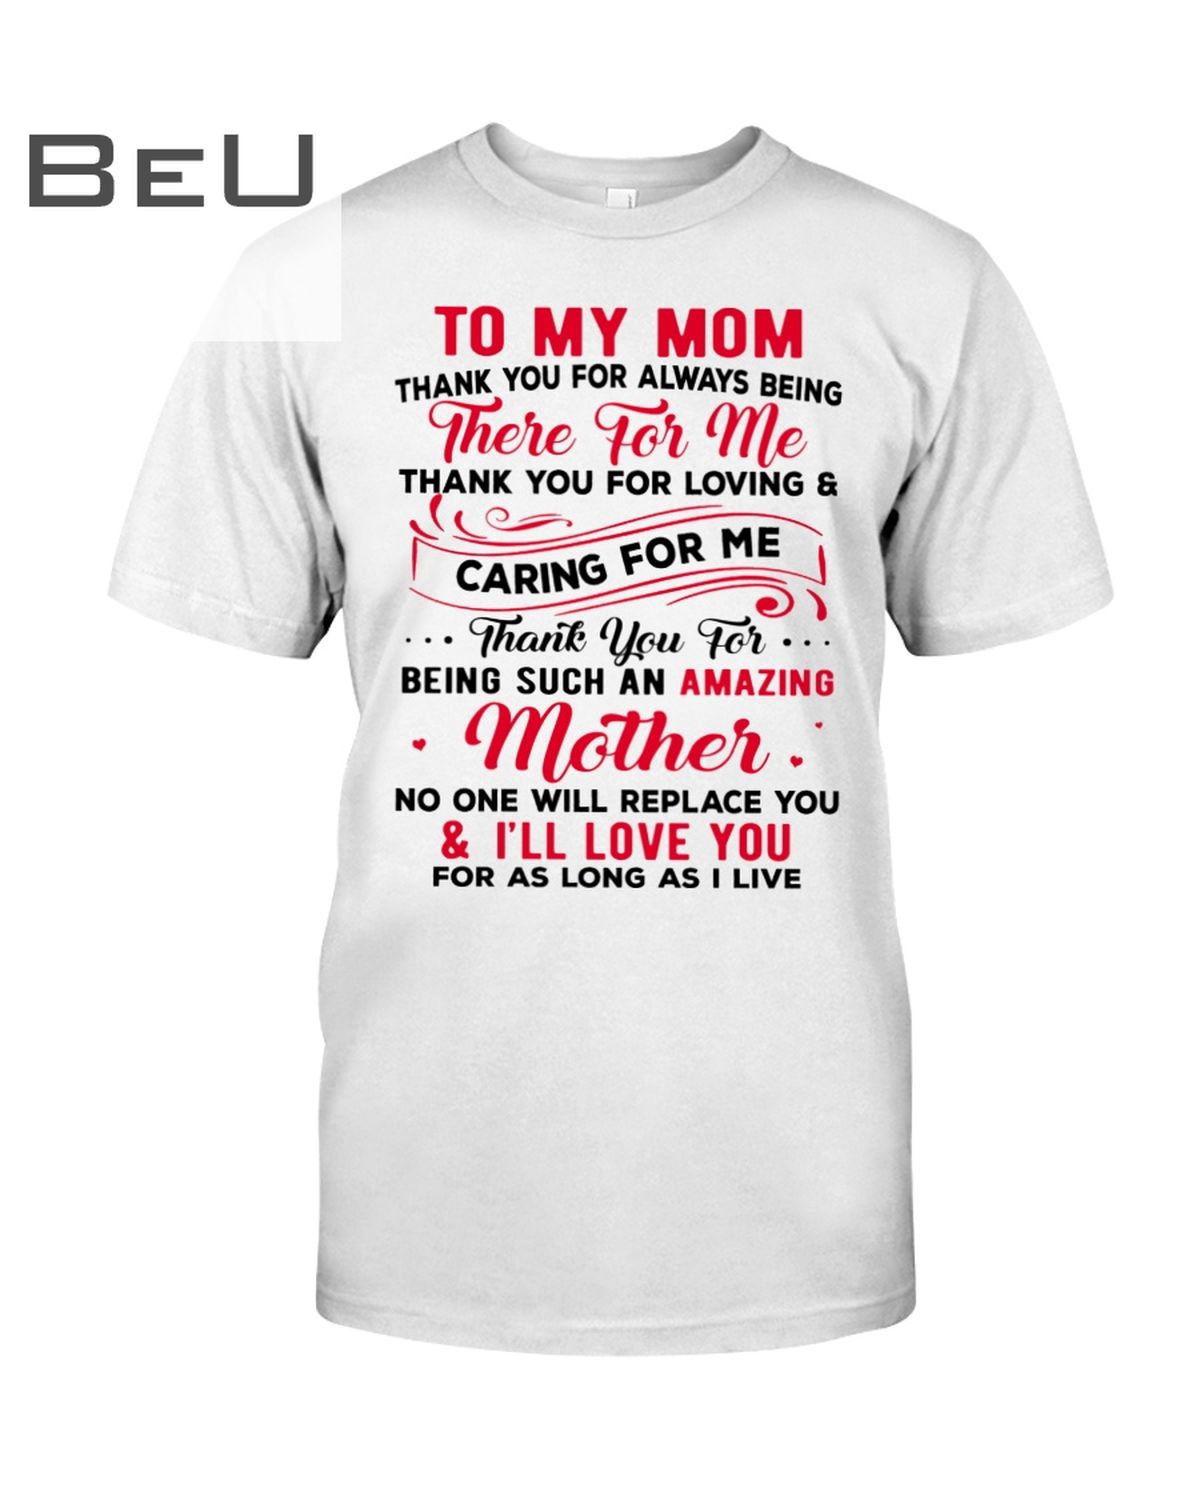 To My Mom Thank You For Always Being There For Me Thank You For Loving And Caring For Me Shirt